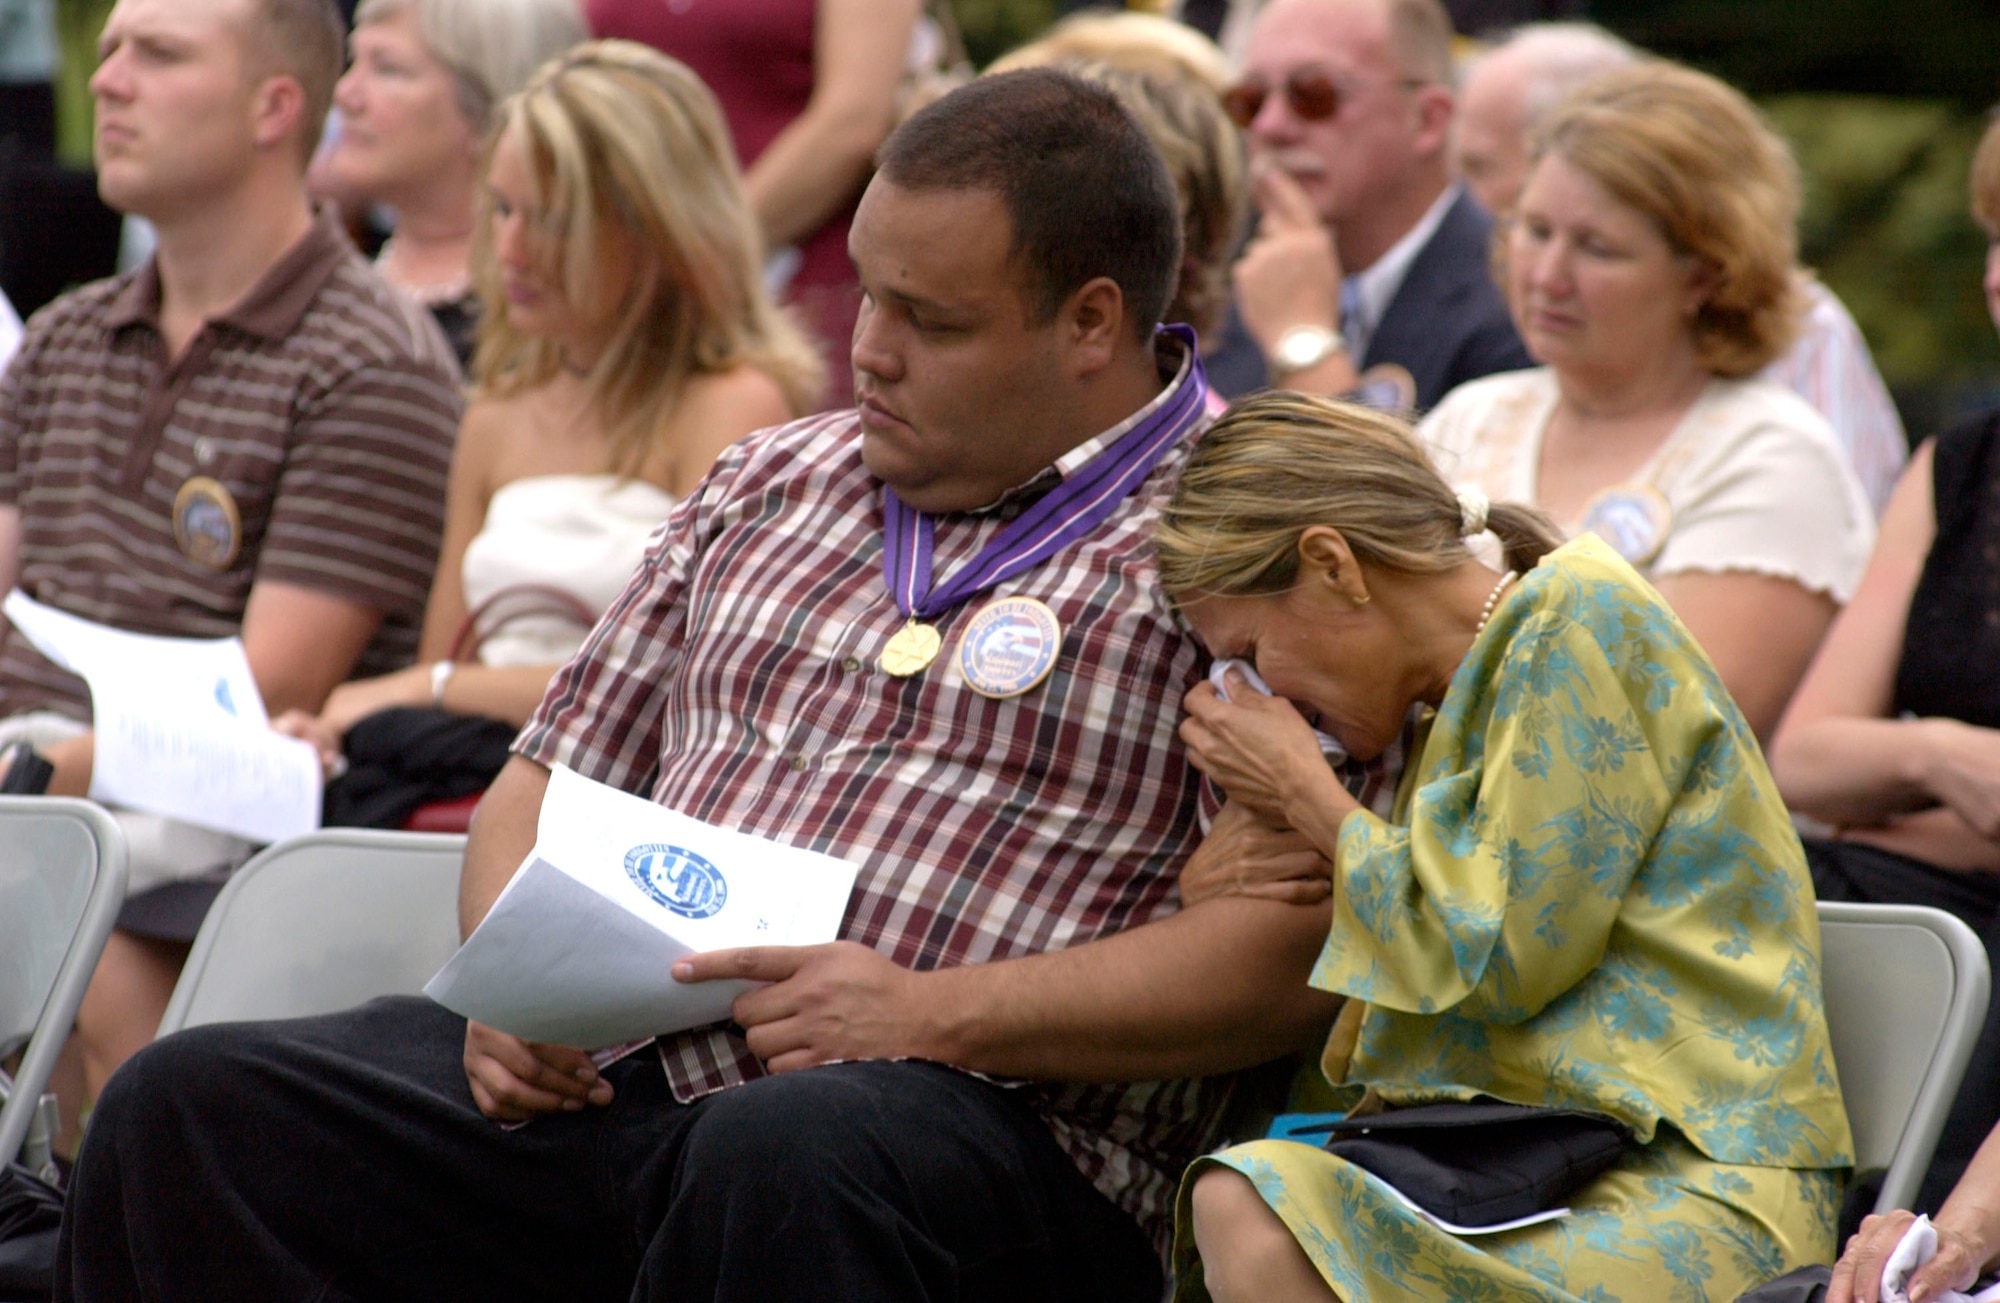 Jenny Haun is comforted by her son, Rafael Haun, during the 10th anniversary remembrance ceremony of the Khobar Towers bombing on Sunday, June 25, at Arlington National Cemetery, Va.  Her husband, Capt. Leeland Haun, was one of 19 Airmen killed in the terrorist bombing at Dhahran Air Base, Saudi Arabia, on June 25, 1996. Family members and friends of those lost gathered for the remembrance ceremony.   (U.S. Air Force photo/Tech. Sgt. Cohen A. Young) 